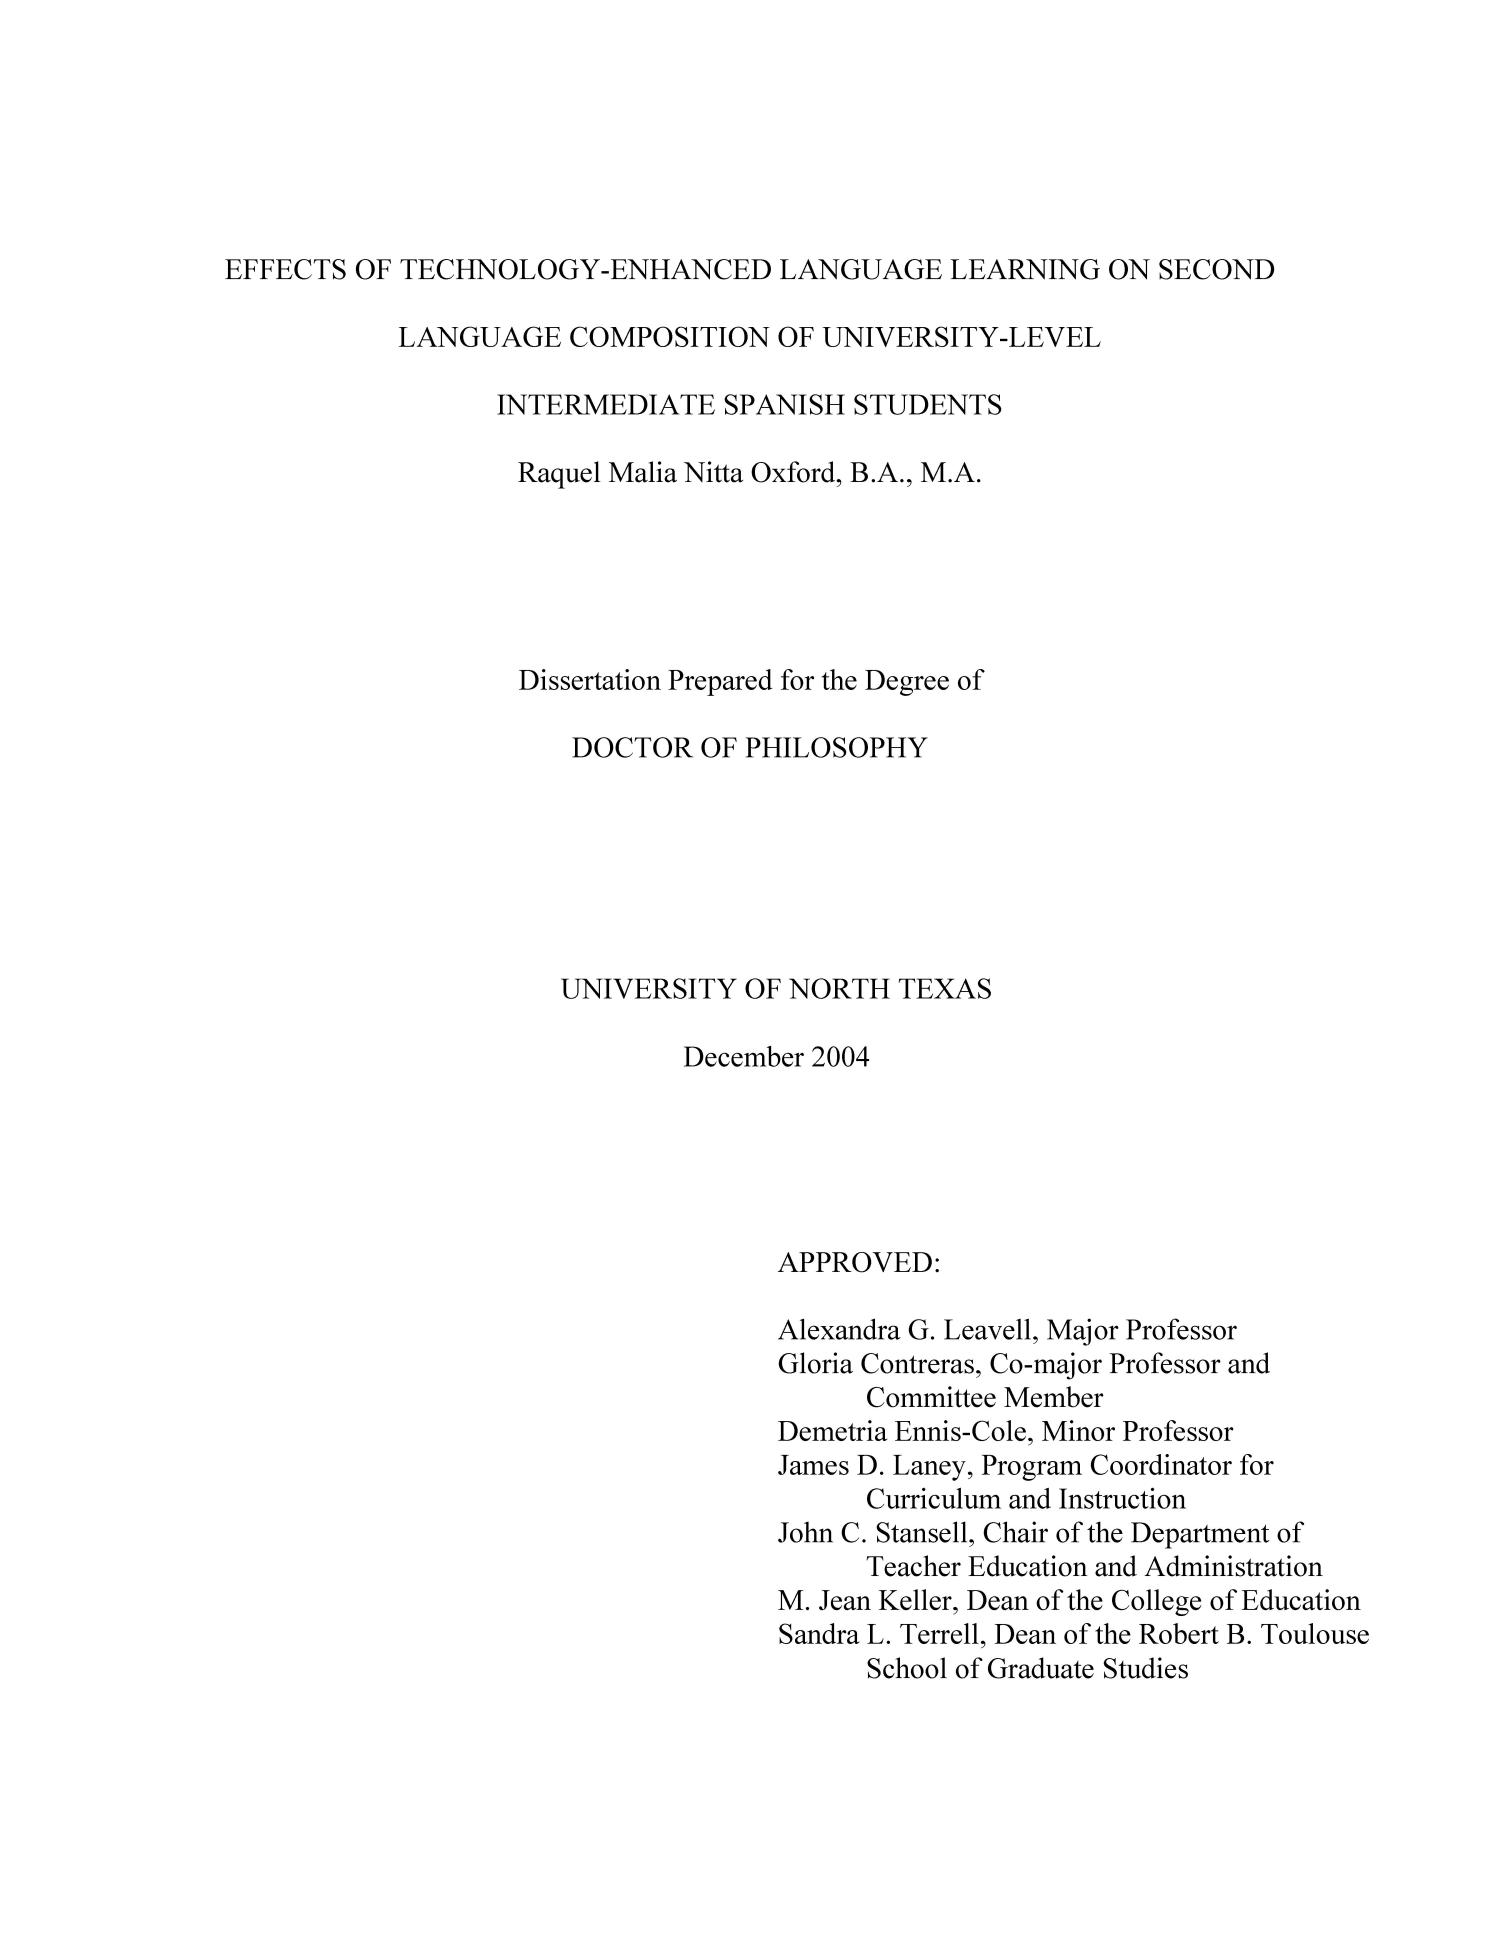 Effects of Technology-Enhanced Language Learning on Second Language Composition of University-Level Intermediate Spanish Students
                                                
                                                    Title Page
                                                